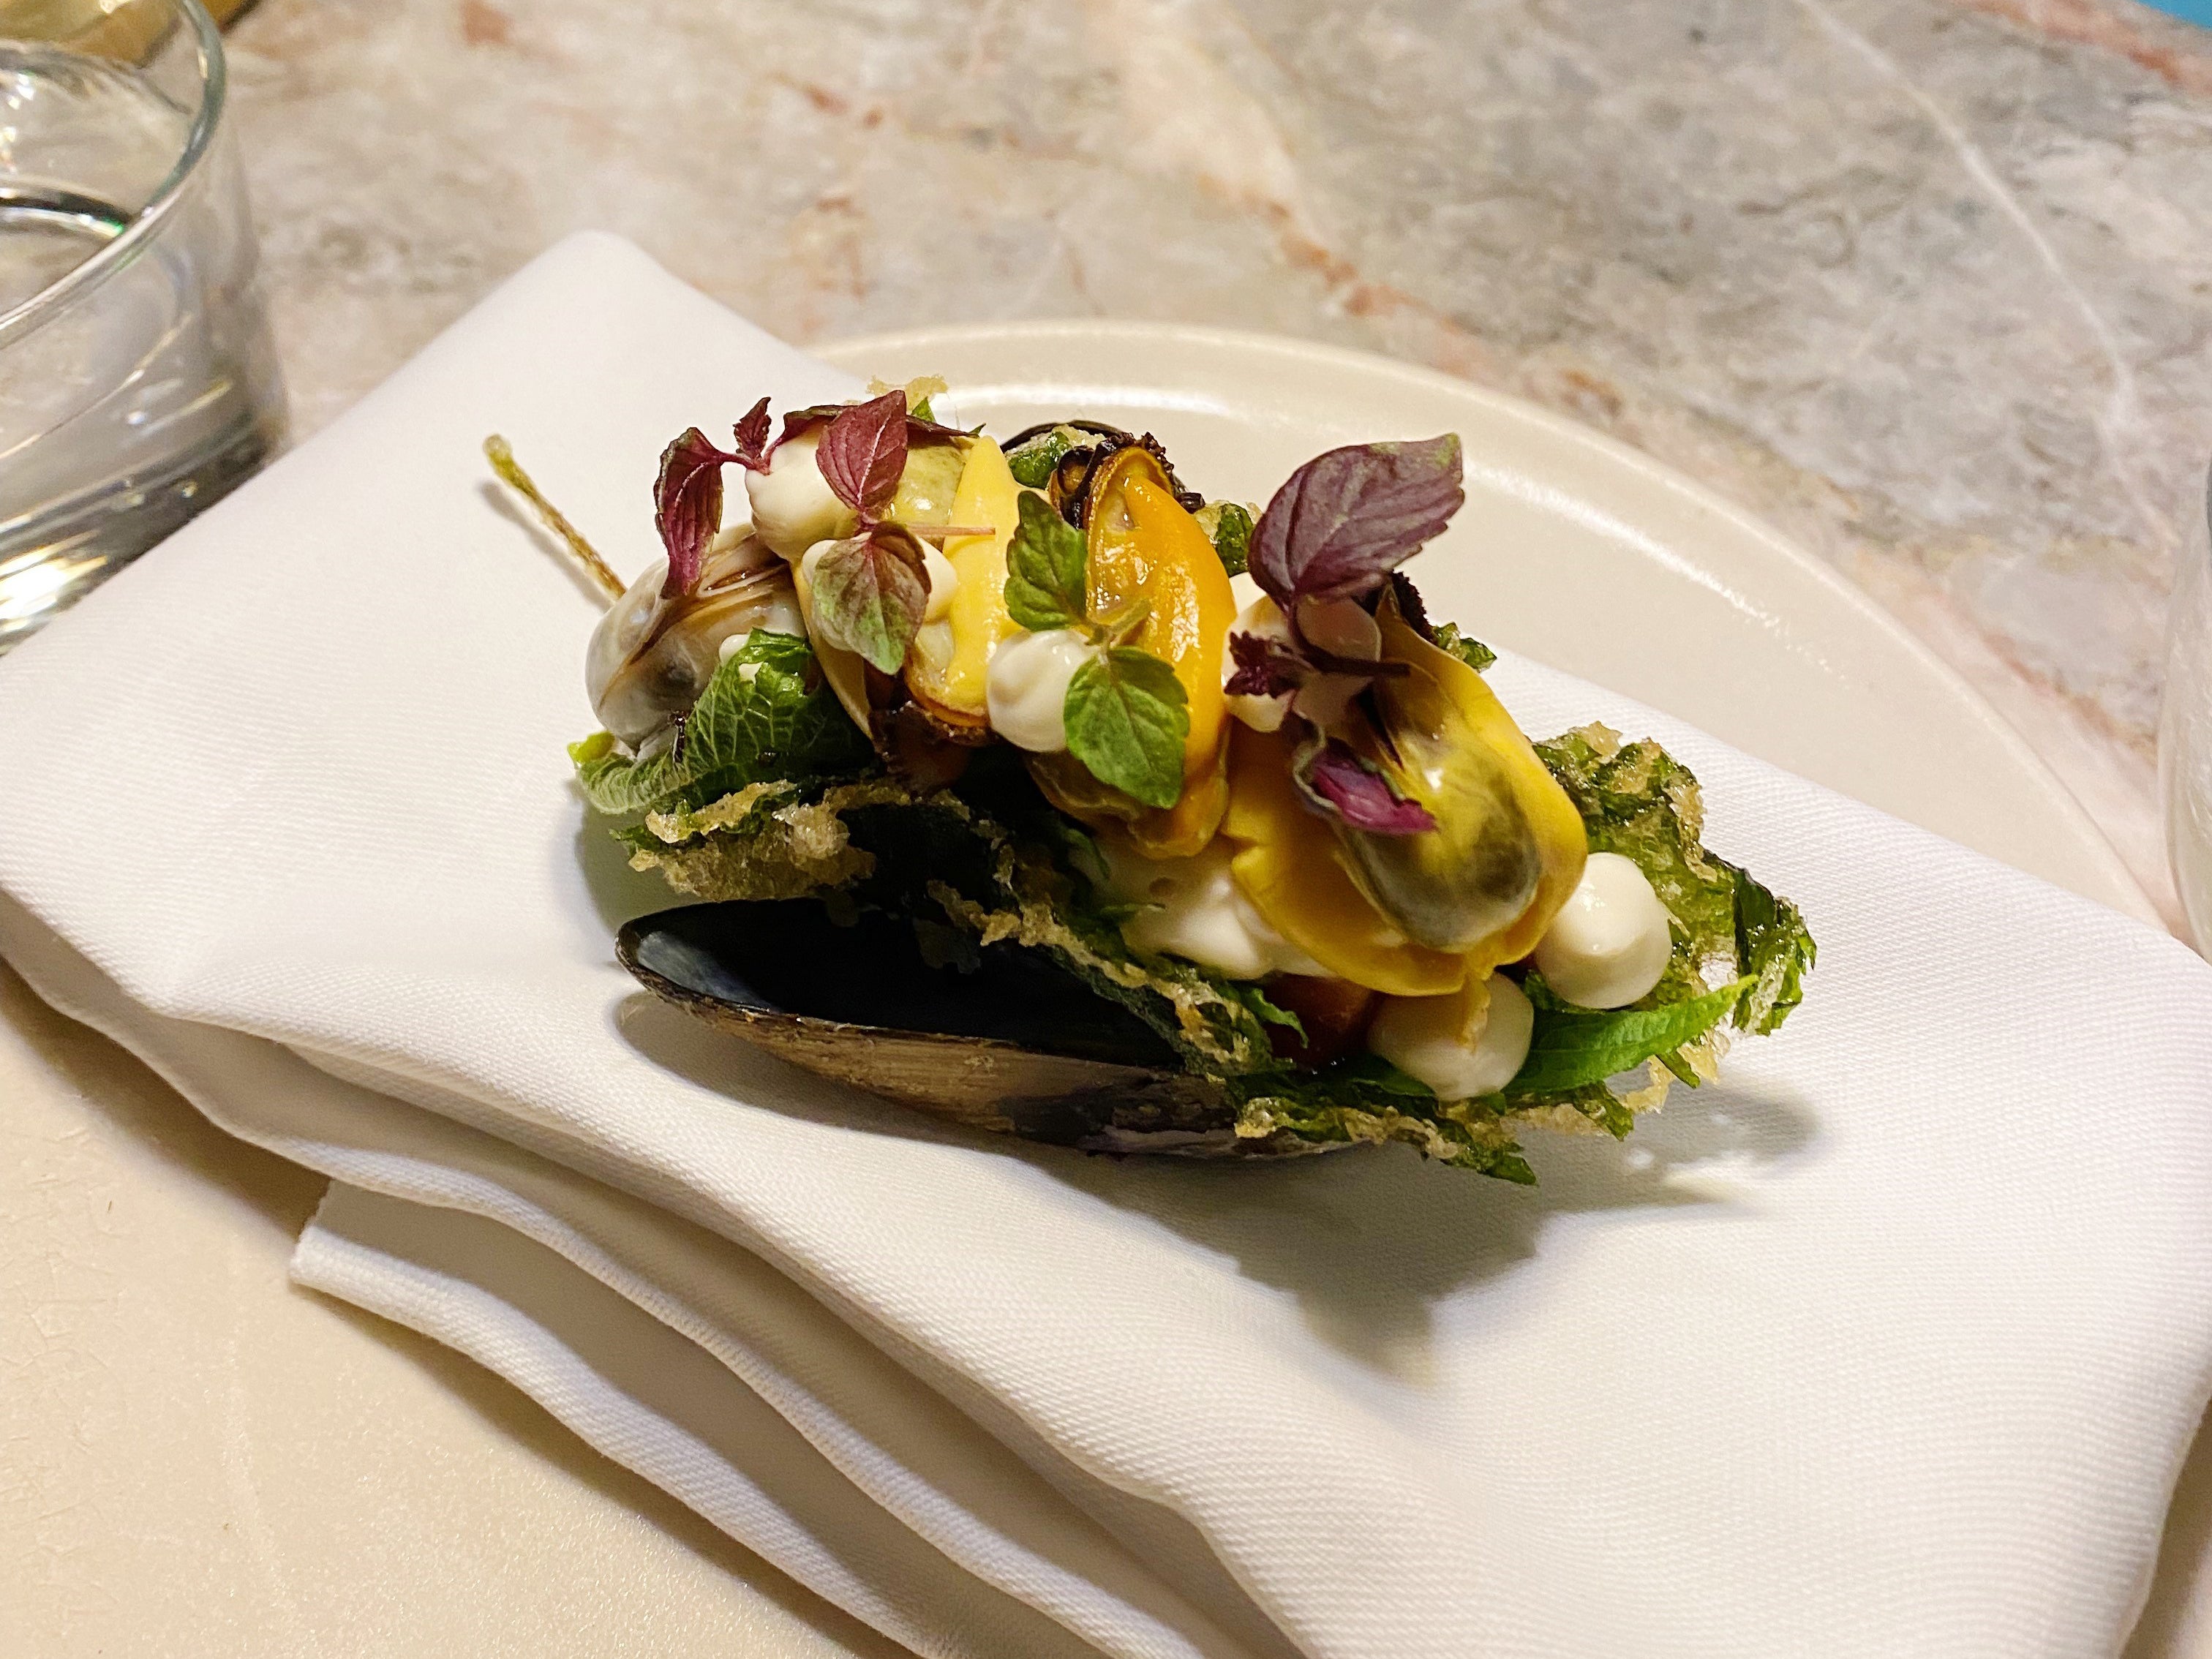 The mussels are wild grown in Cornwall and hand foraged by a brother-sister duo